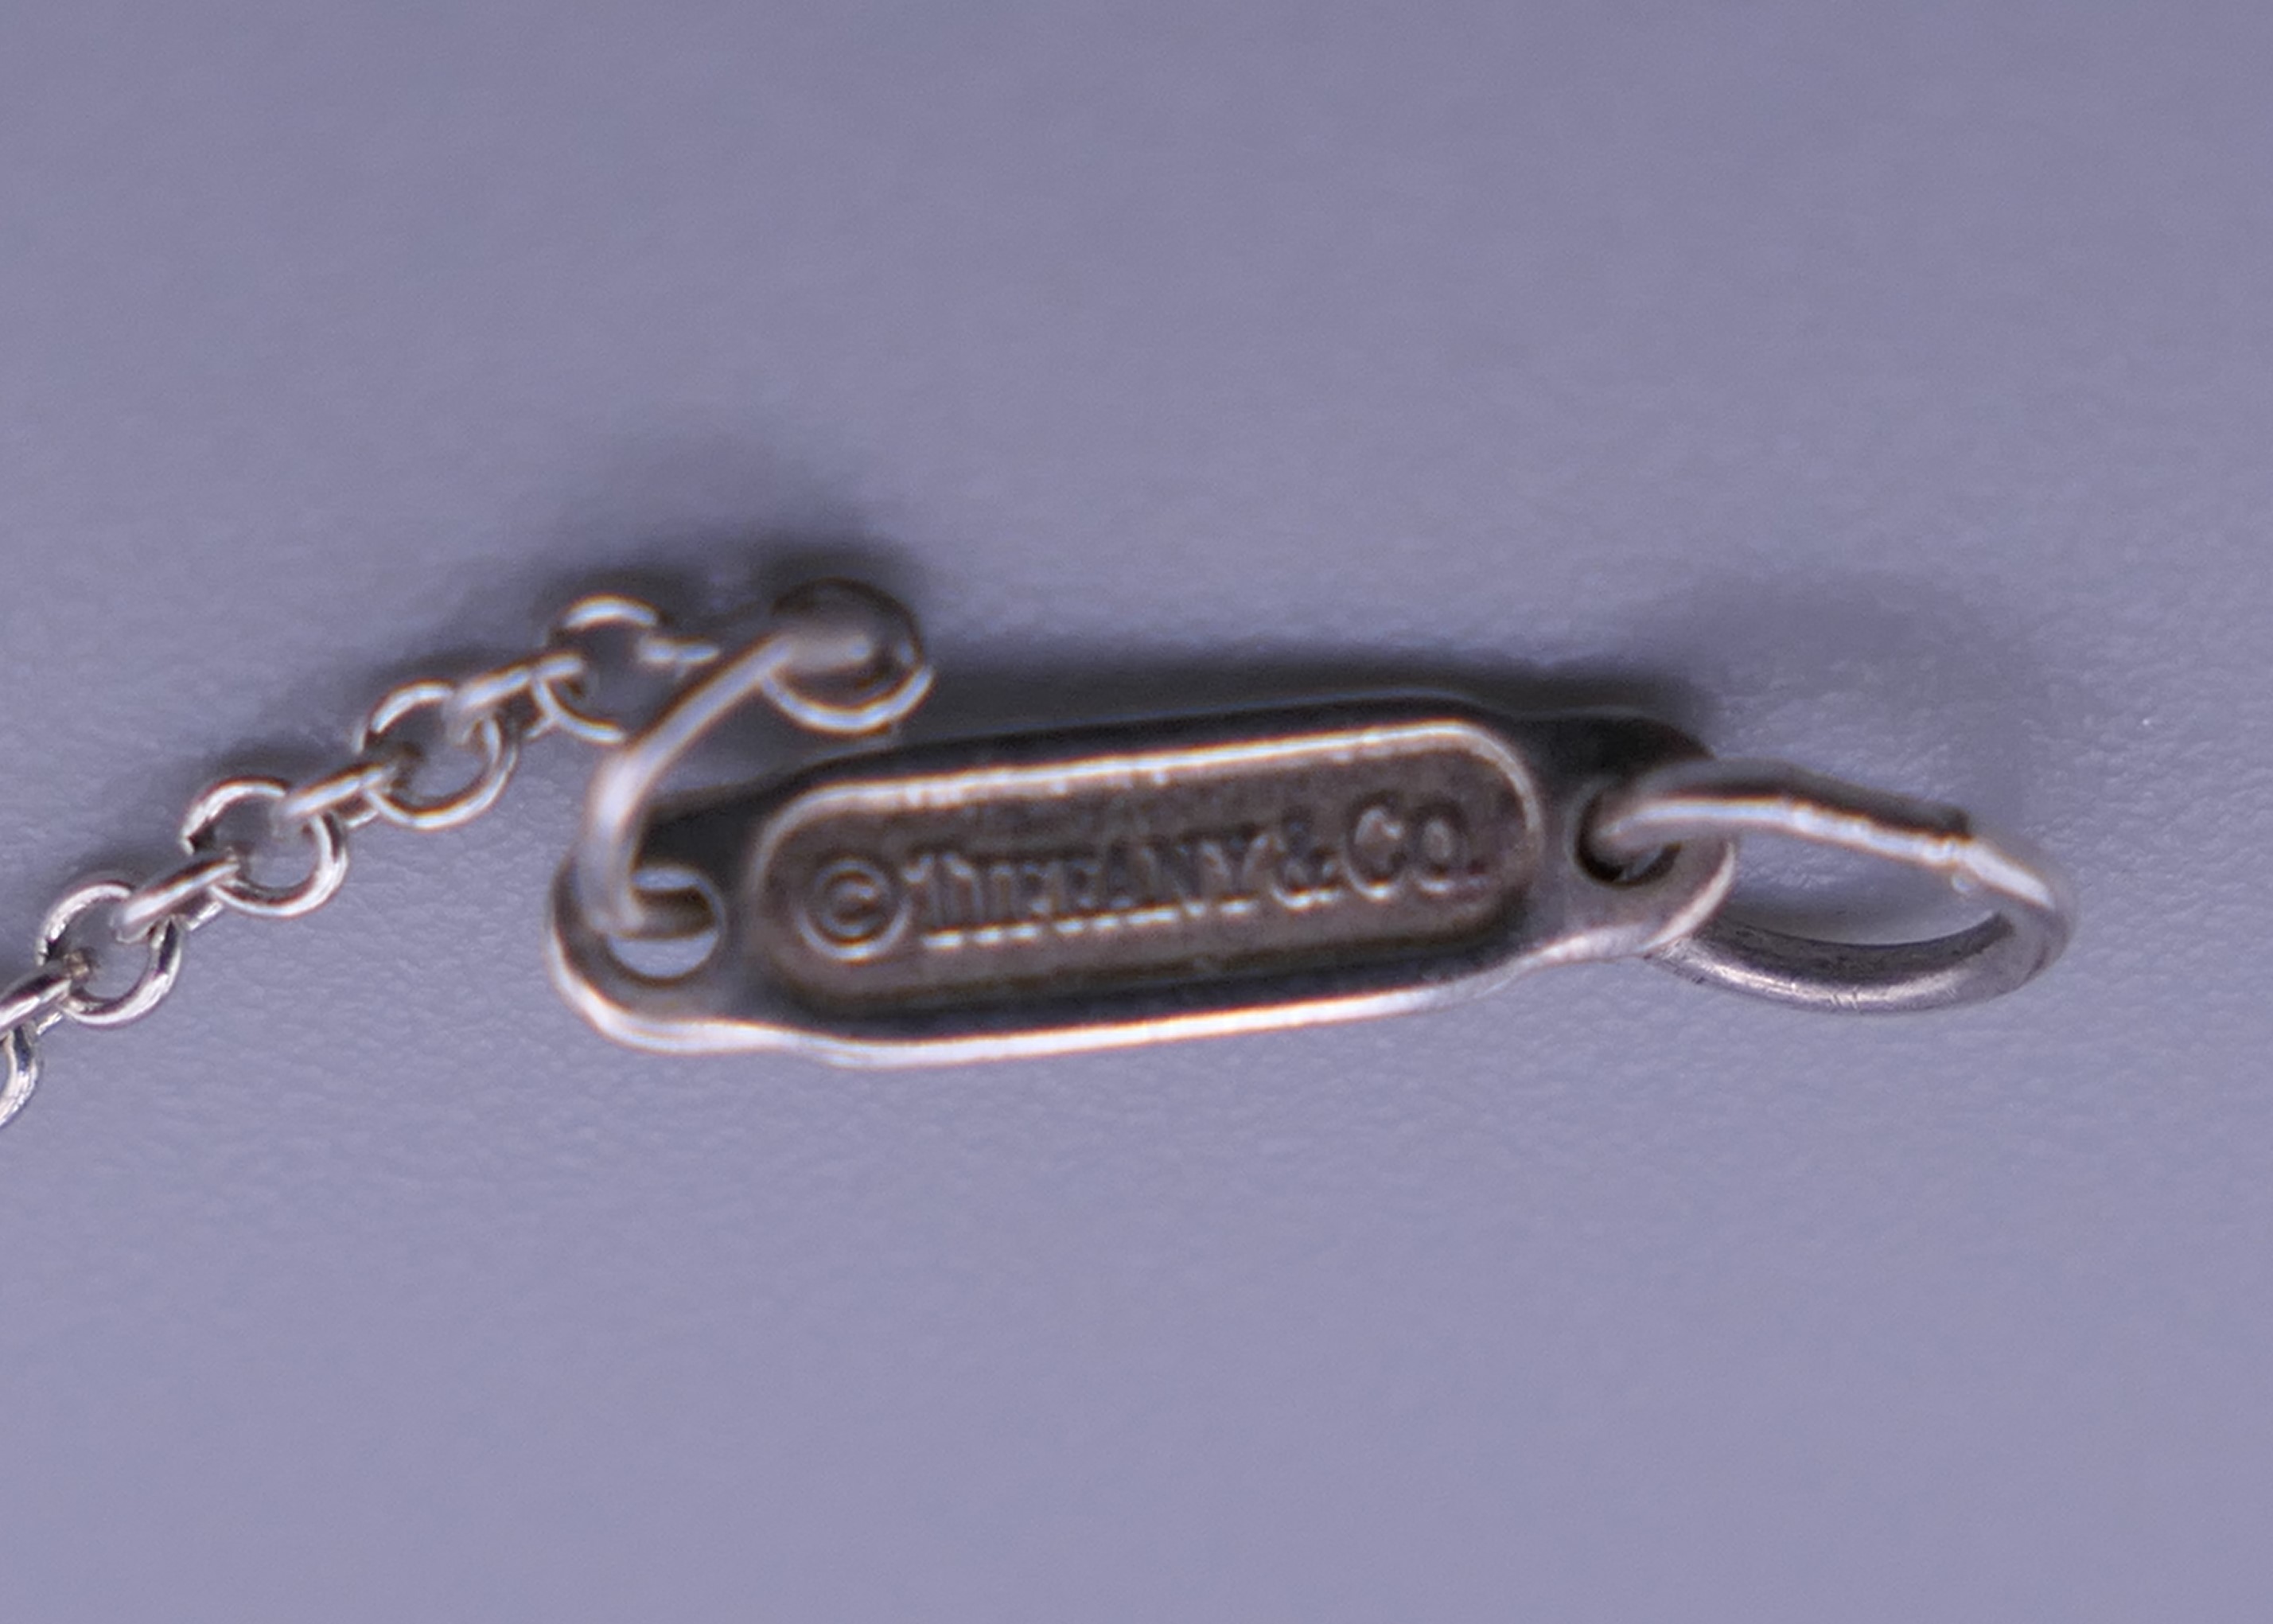 A Tiffany silver key pendant and chain, and a pair of earrings. Pendant 3 cm long. - Image 8 of 8